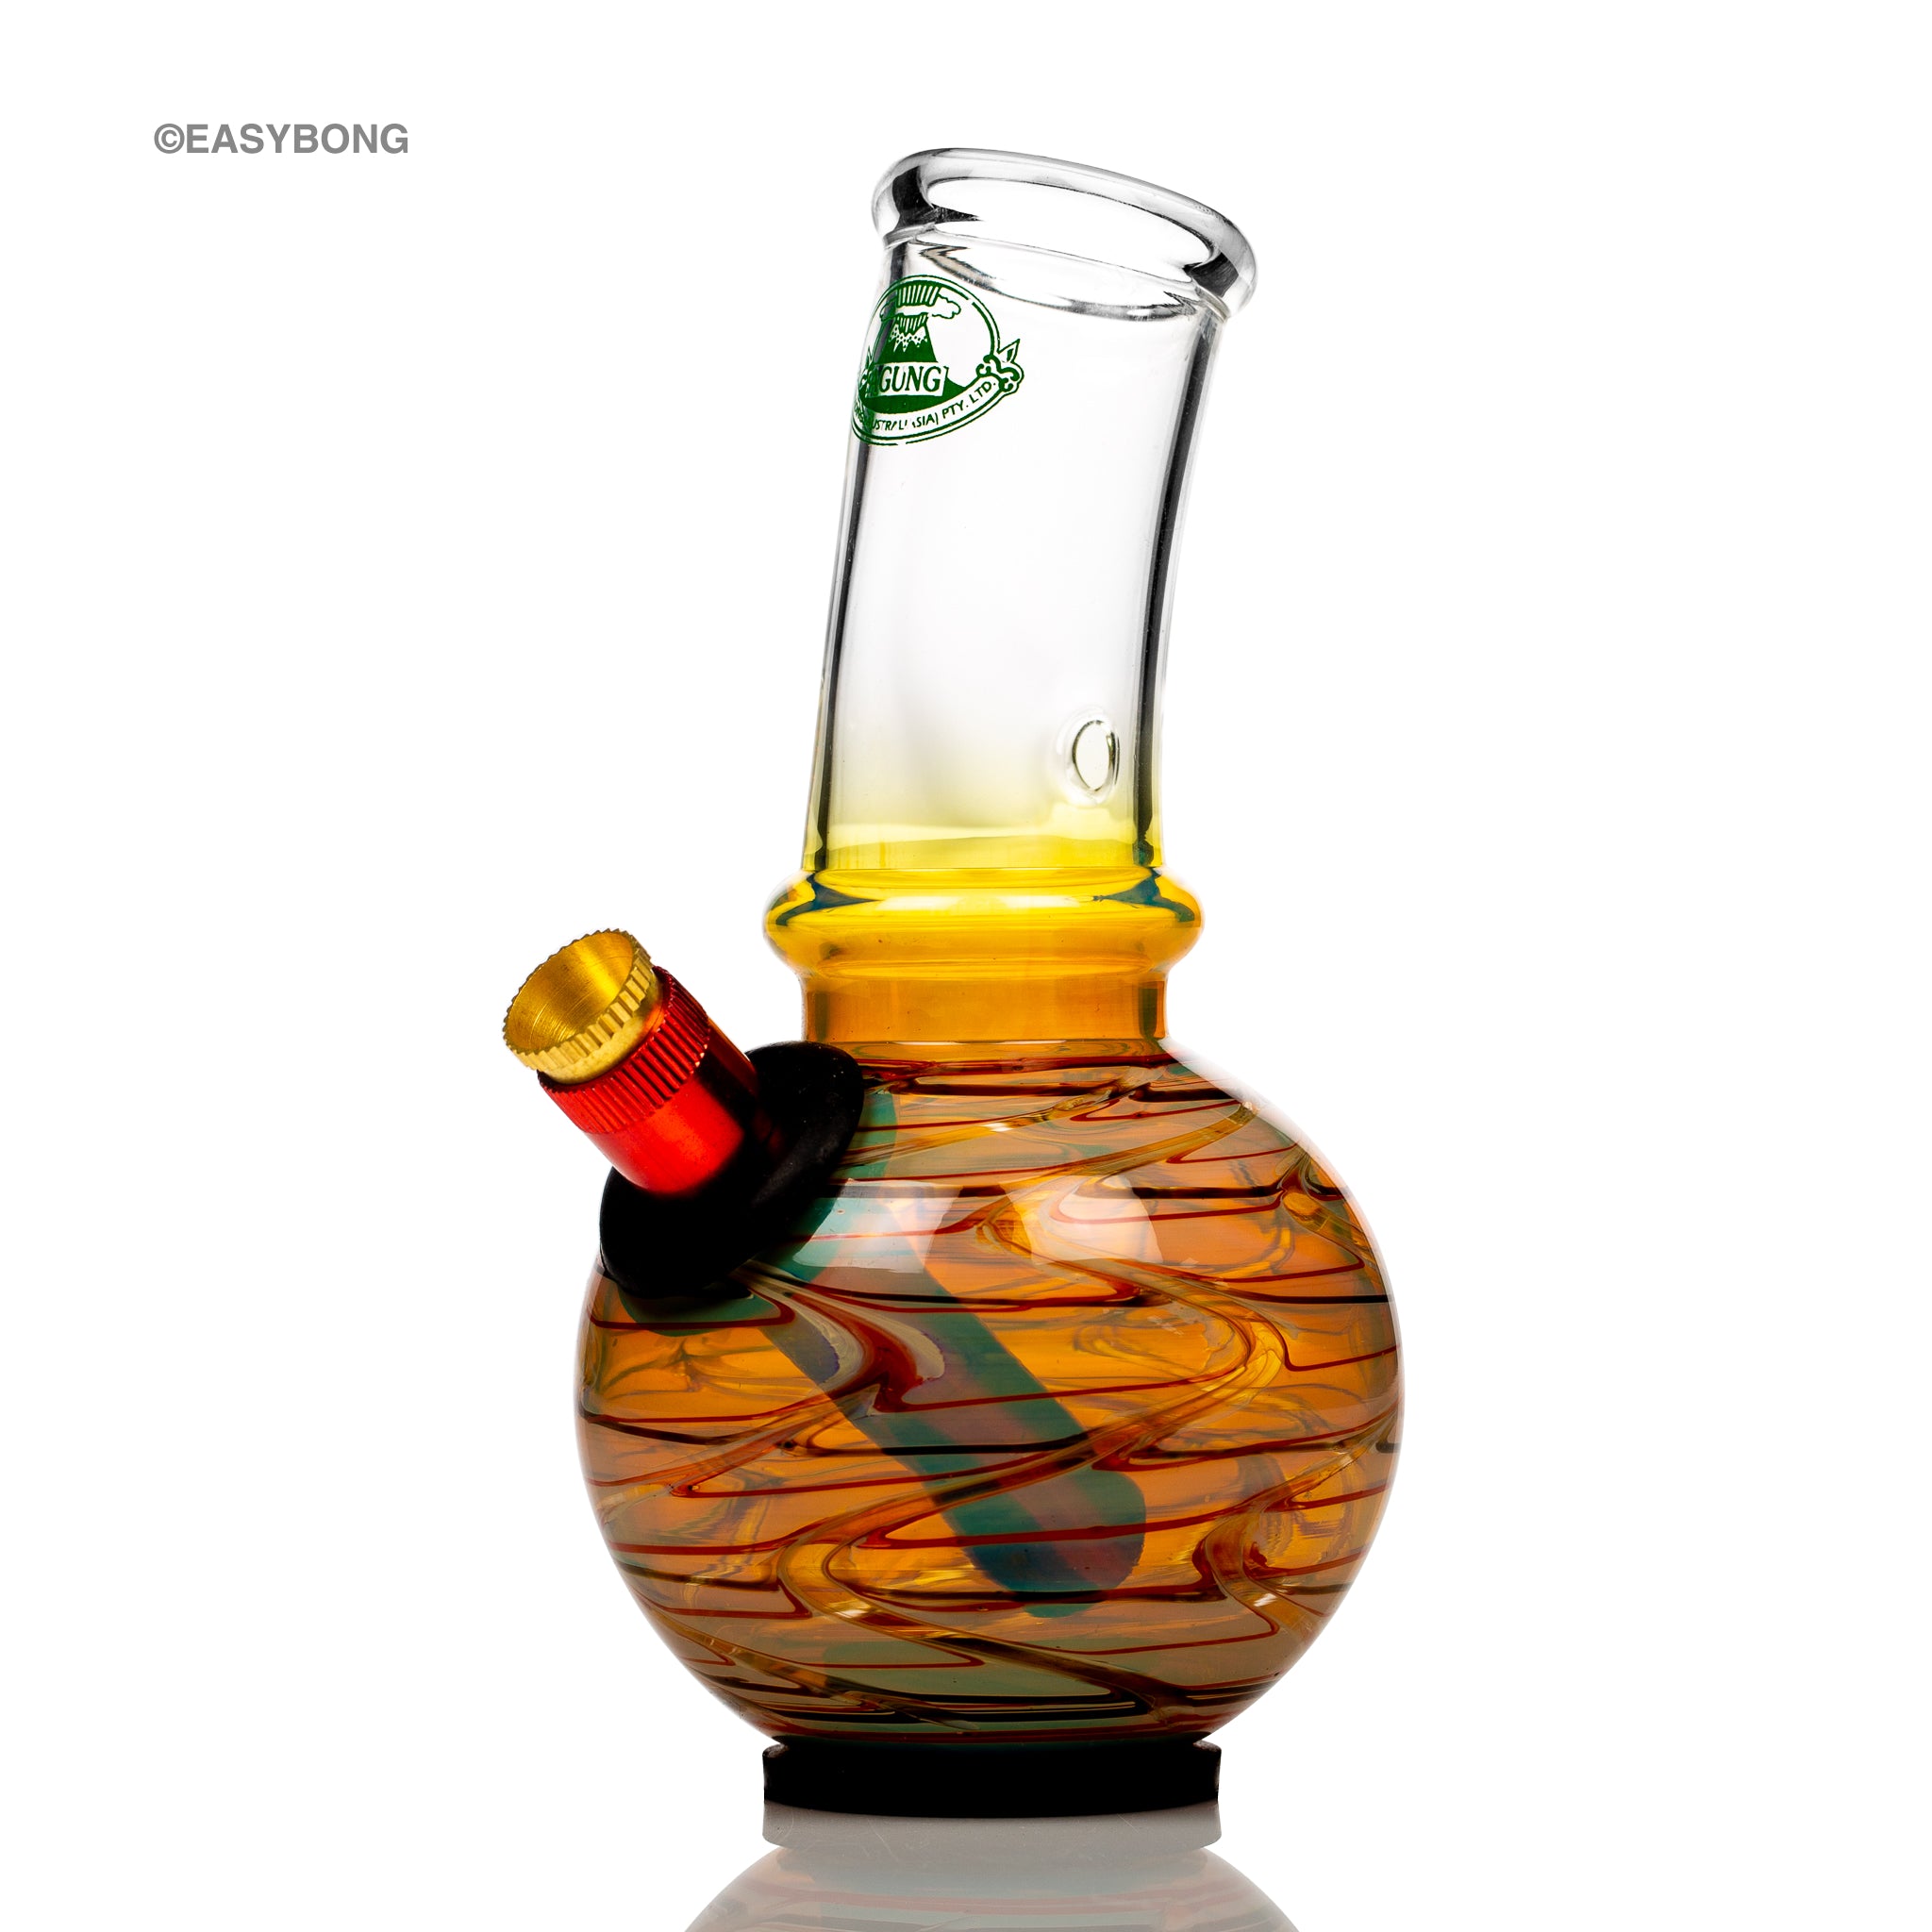 Agung baby bubble Aussie style bong with brass cone piece.